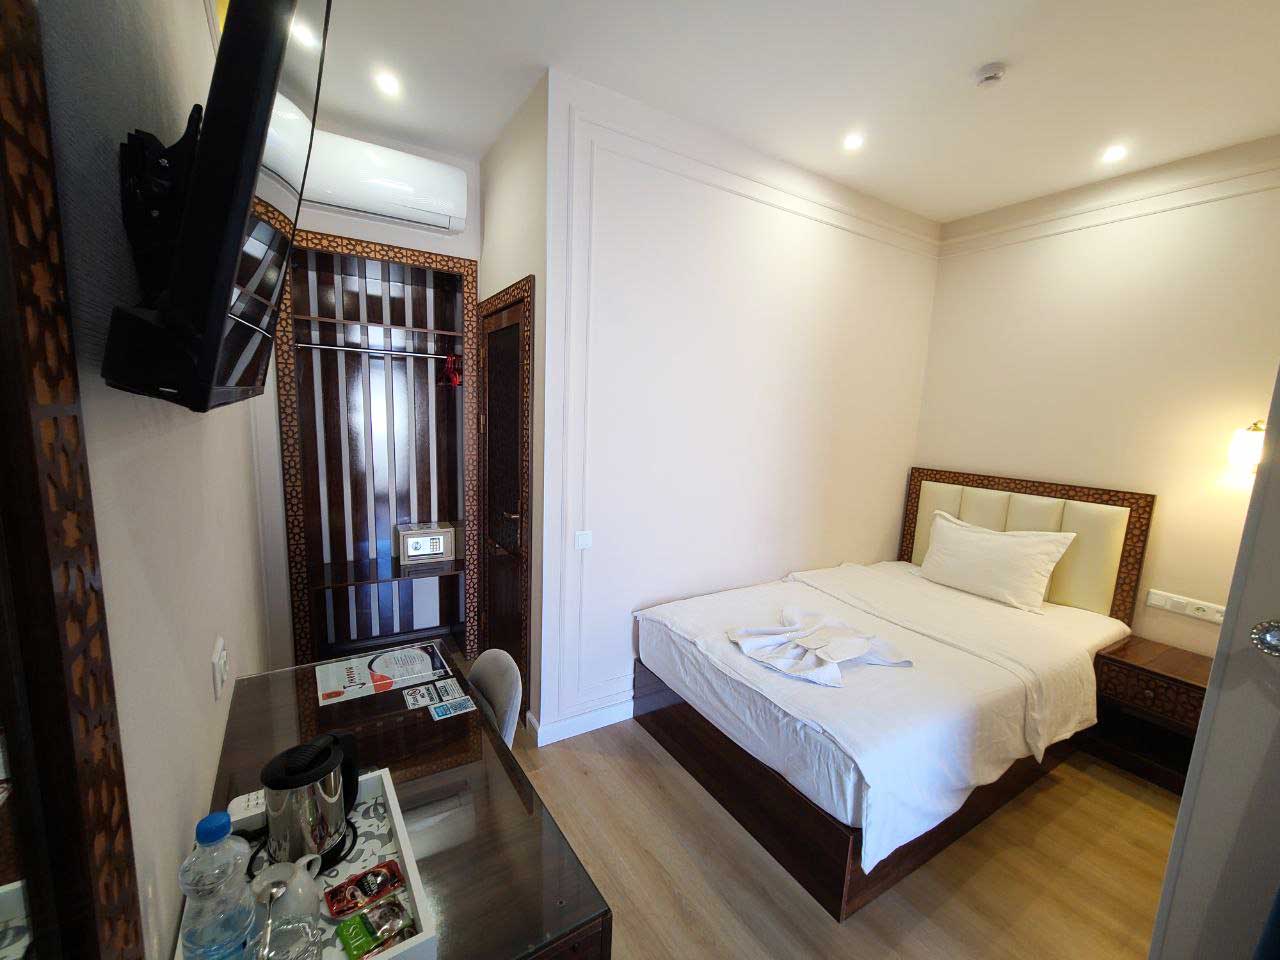 Refined deluxe single room in the hotel, featuring a desk and a comfortable single bed